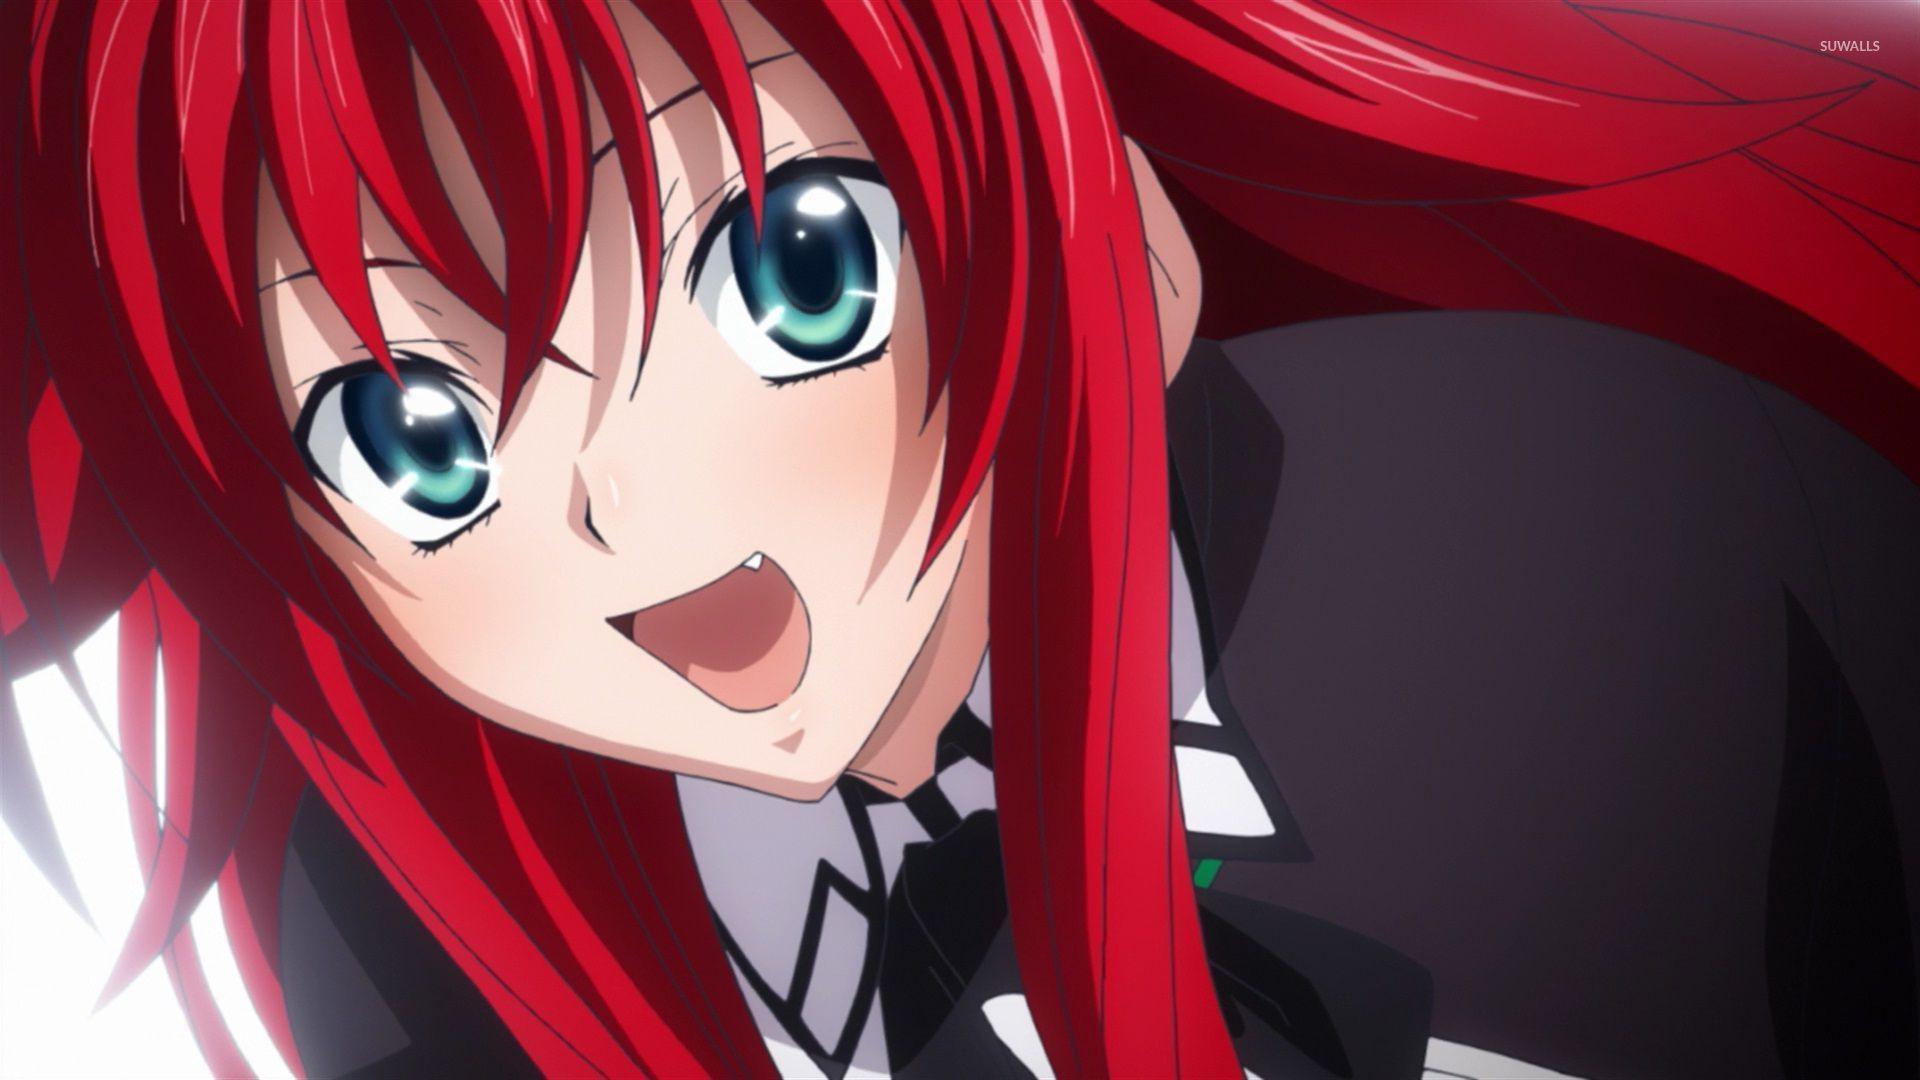 Anime High School Dxd Rias Wallpapers Wallpaper Cave Images, Photos, Reviews